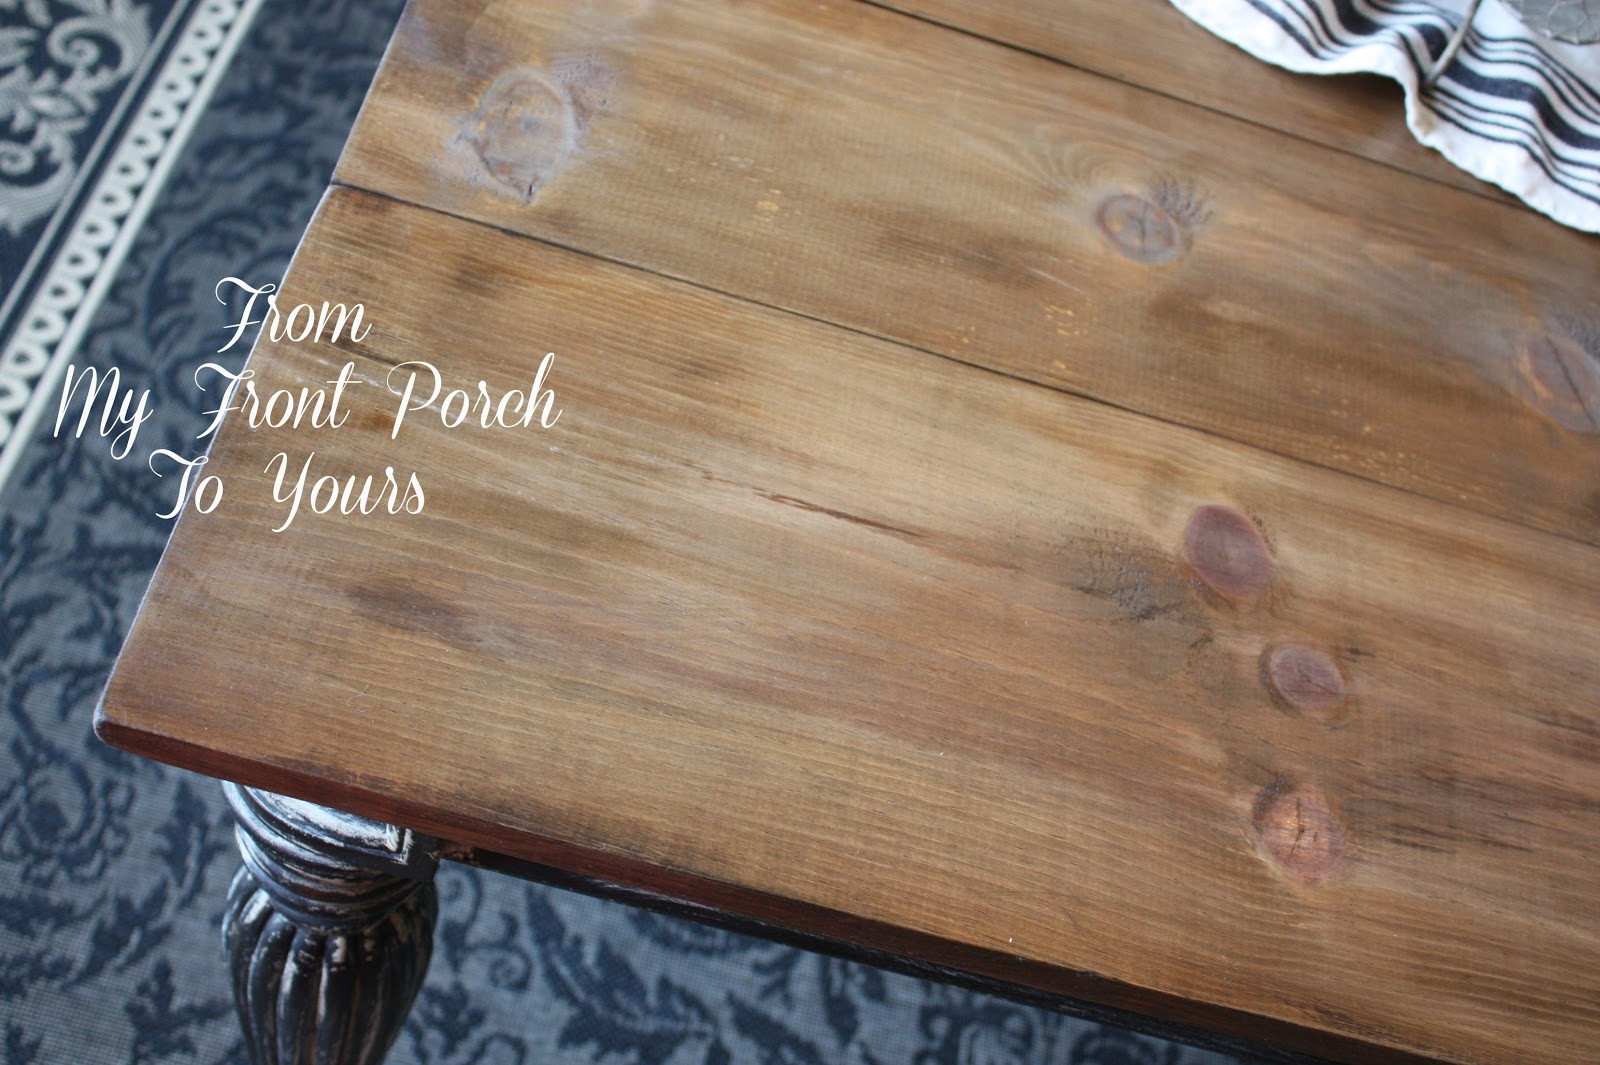 DIY Wood Table Top
 From My Front Porch To Yours DIY Wood Plank Table Top Reveal